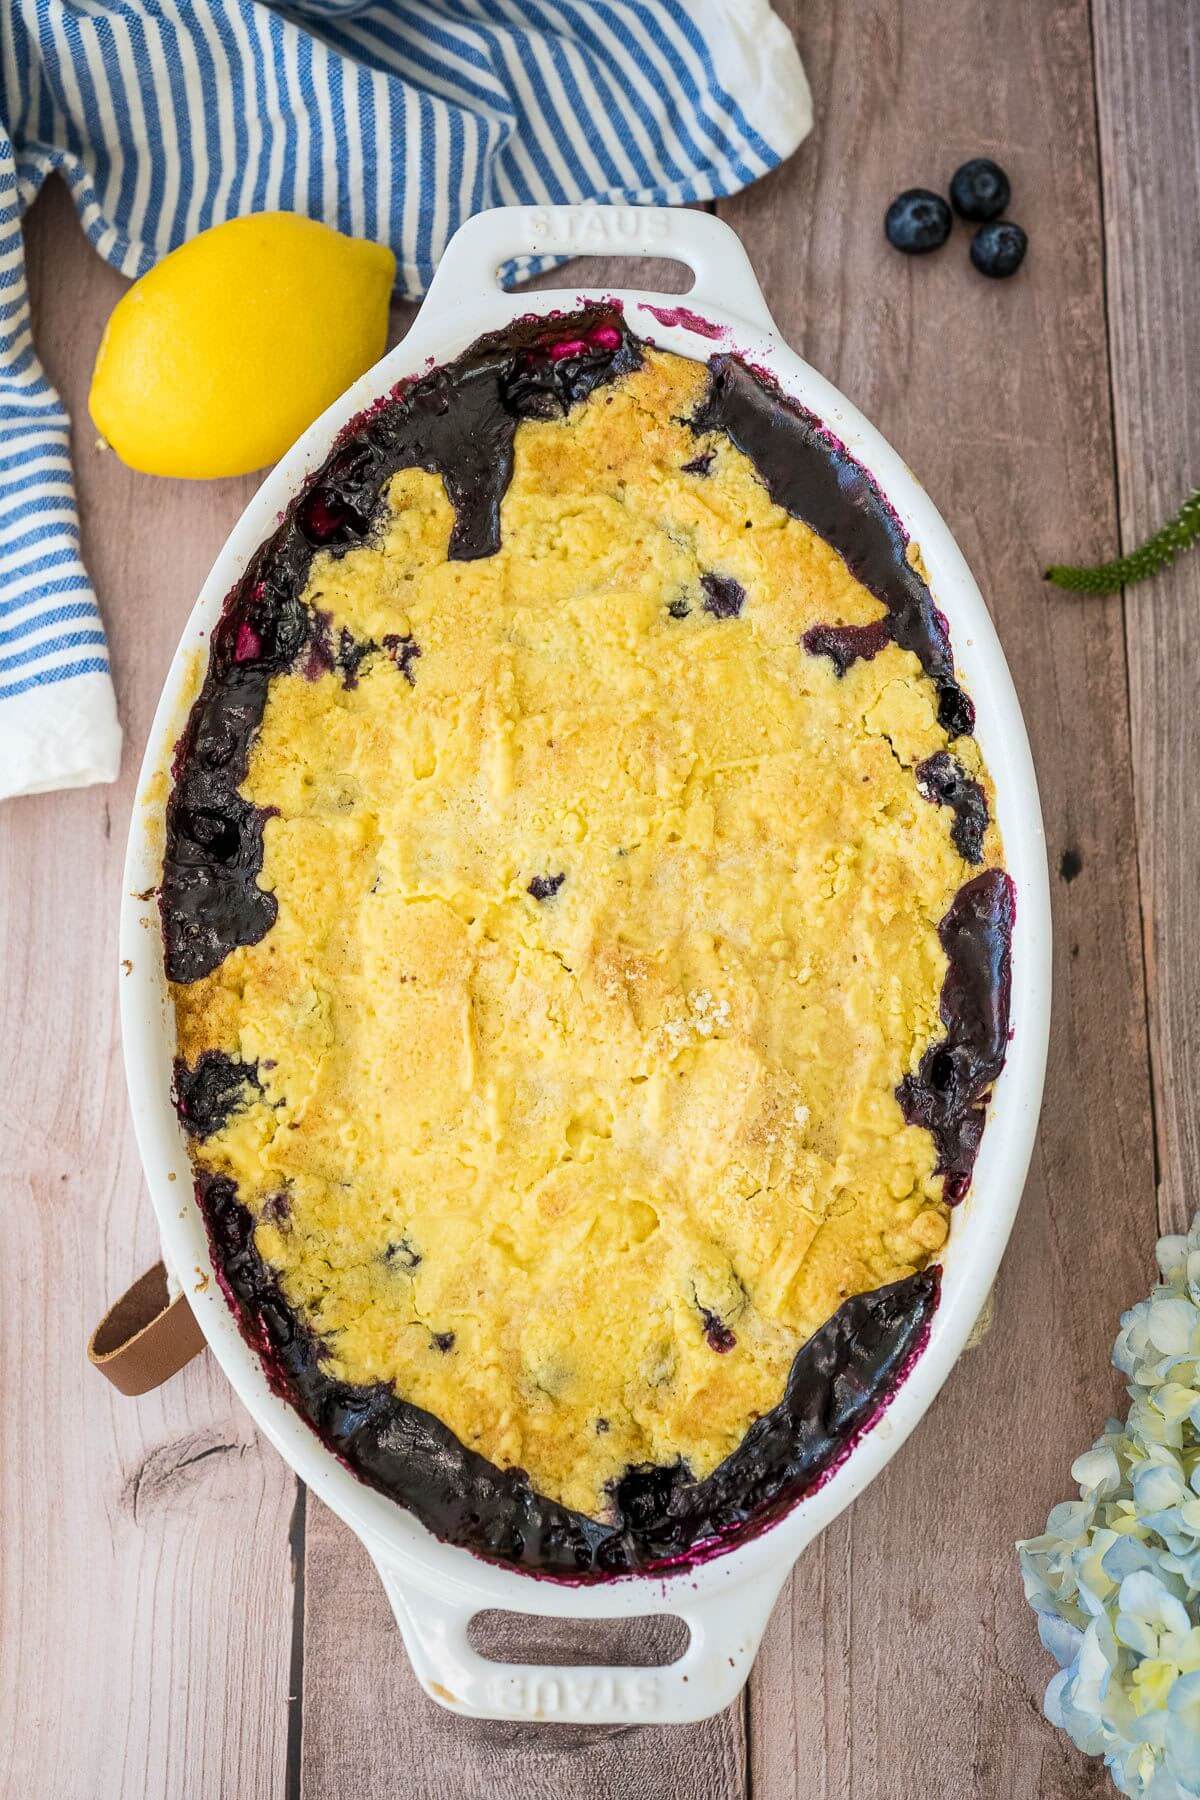 A baking dish full of blueberry and lemon cake rests next to more fruit, flowers, and a fine cloth.